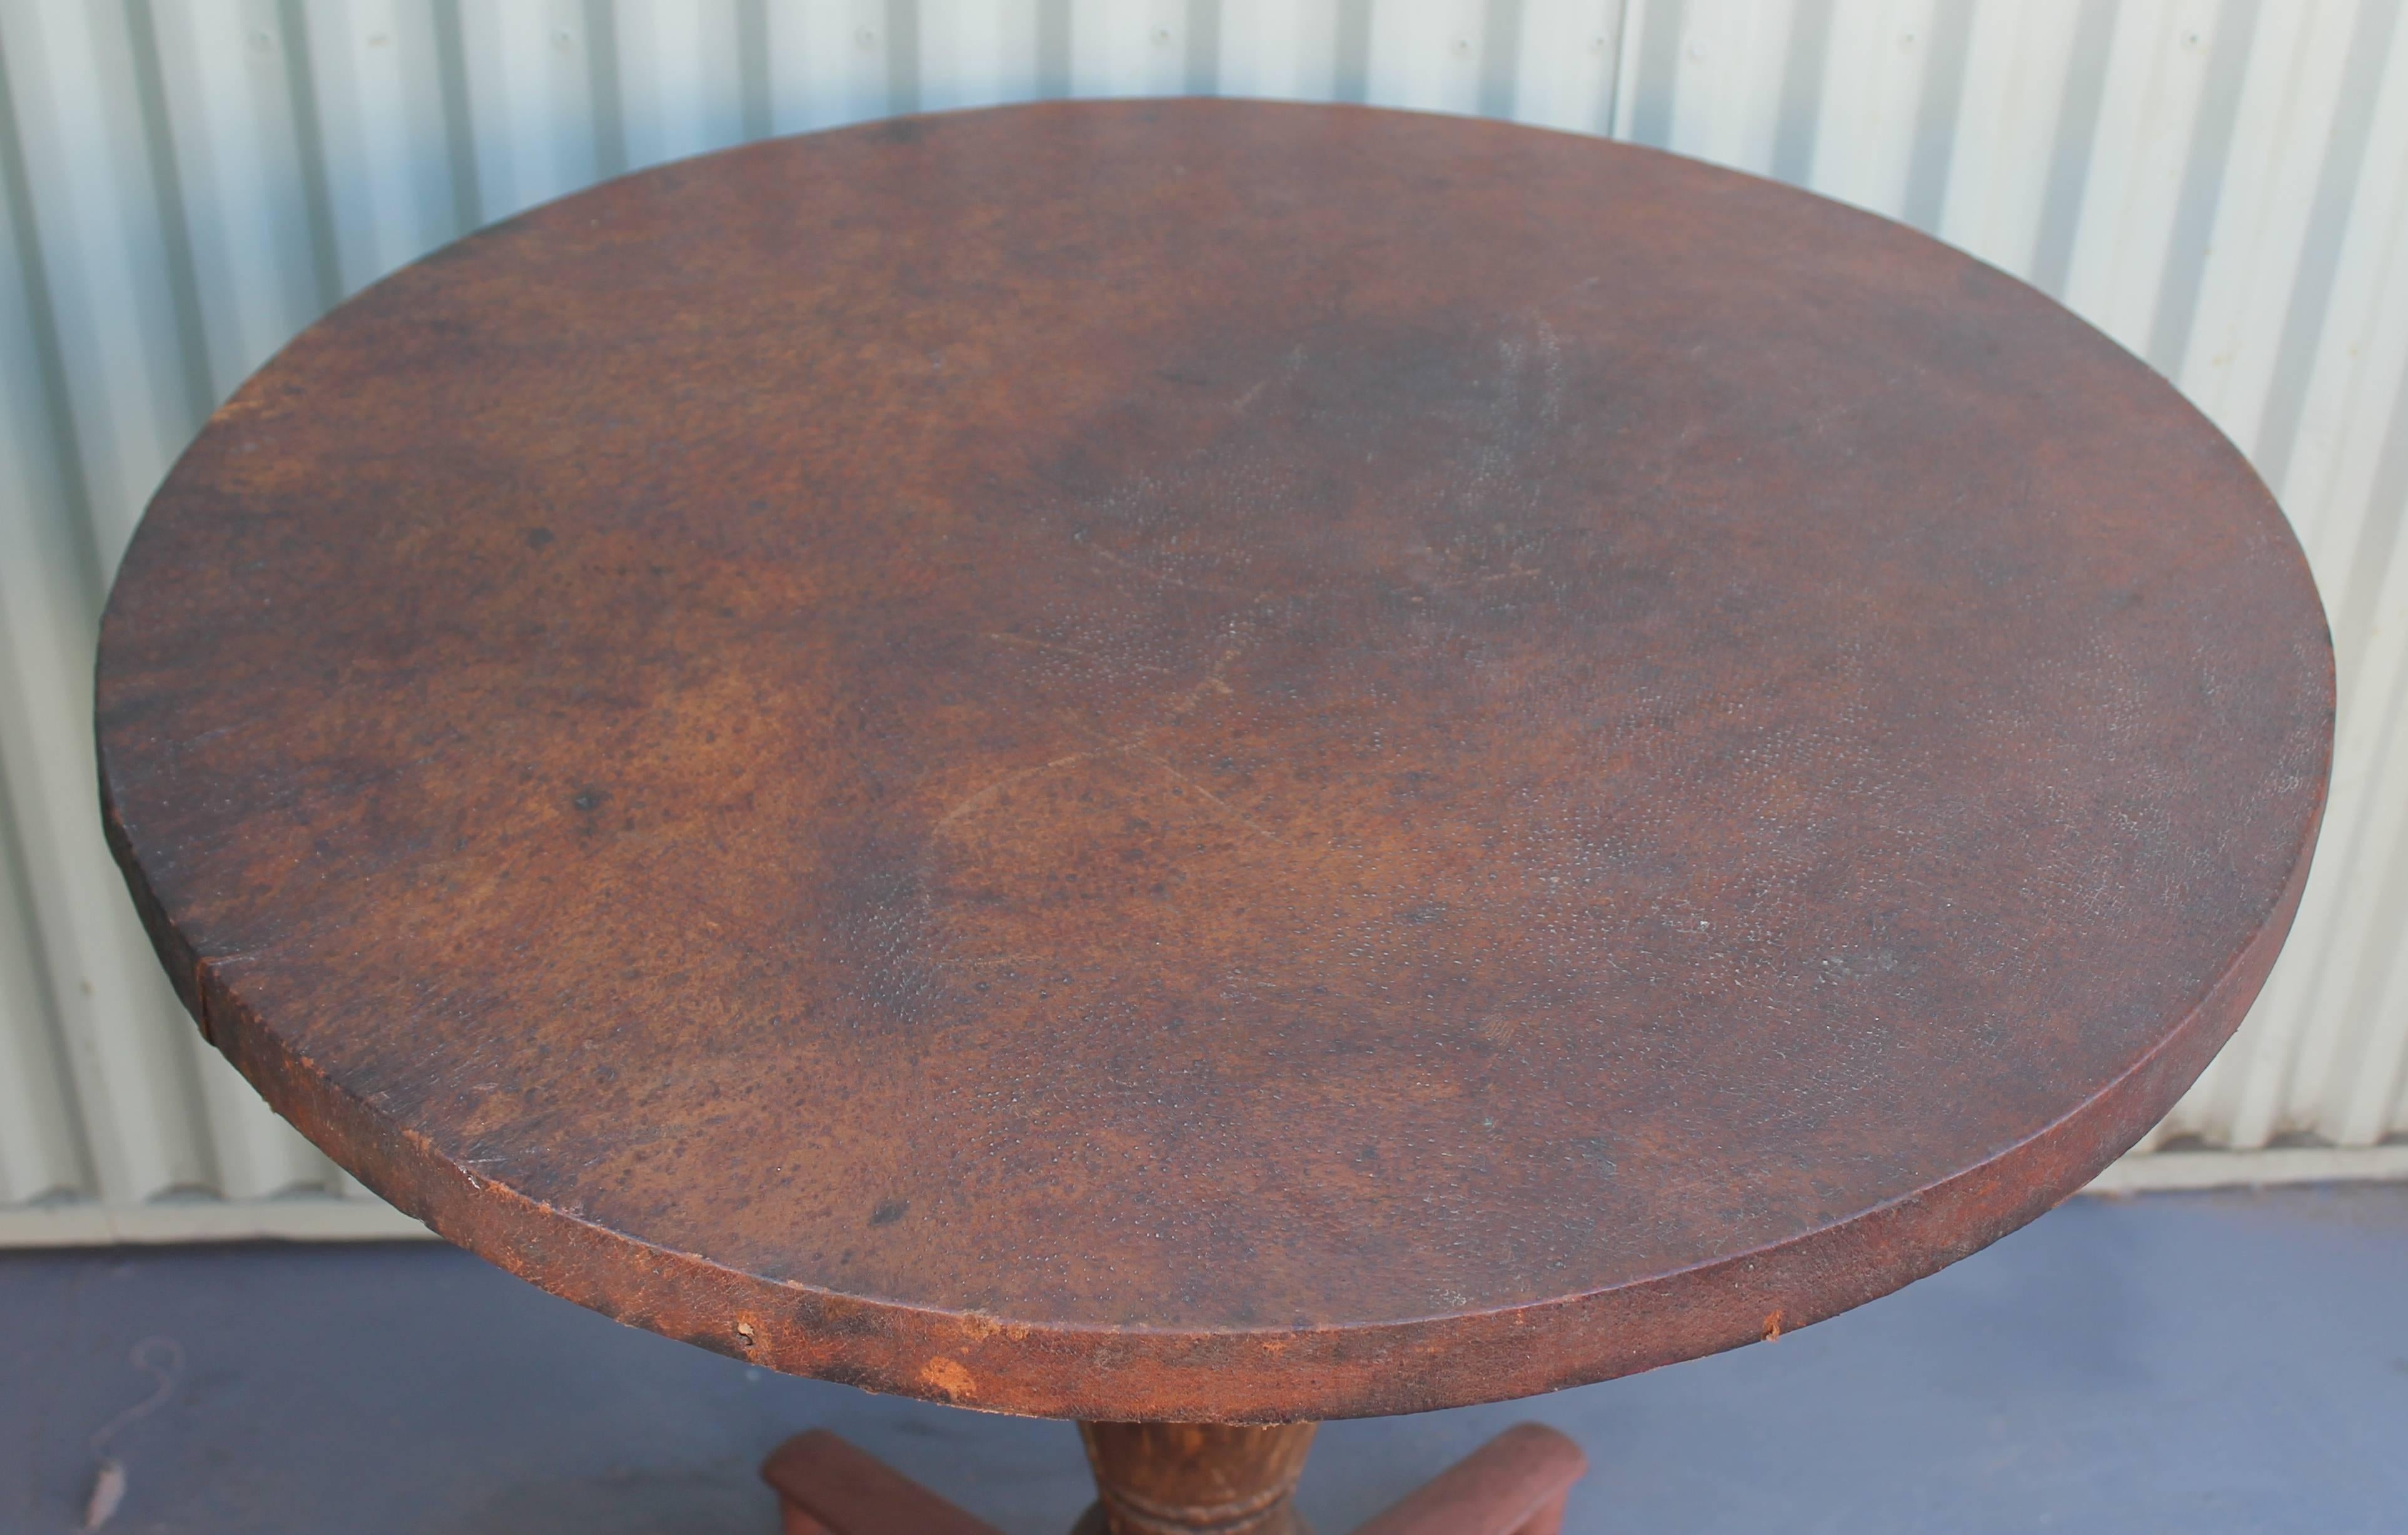 This fantastic game table could be used in a winery or bar, in just about any type of decor. It is constructed of a wood top and wood base with original painted iron feet. The condition is very good and sturdy.